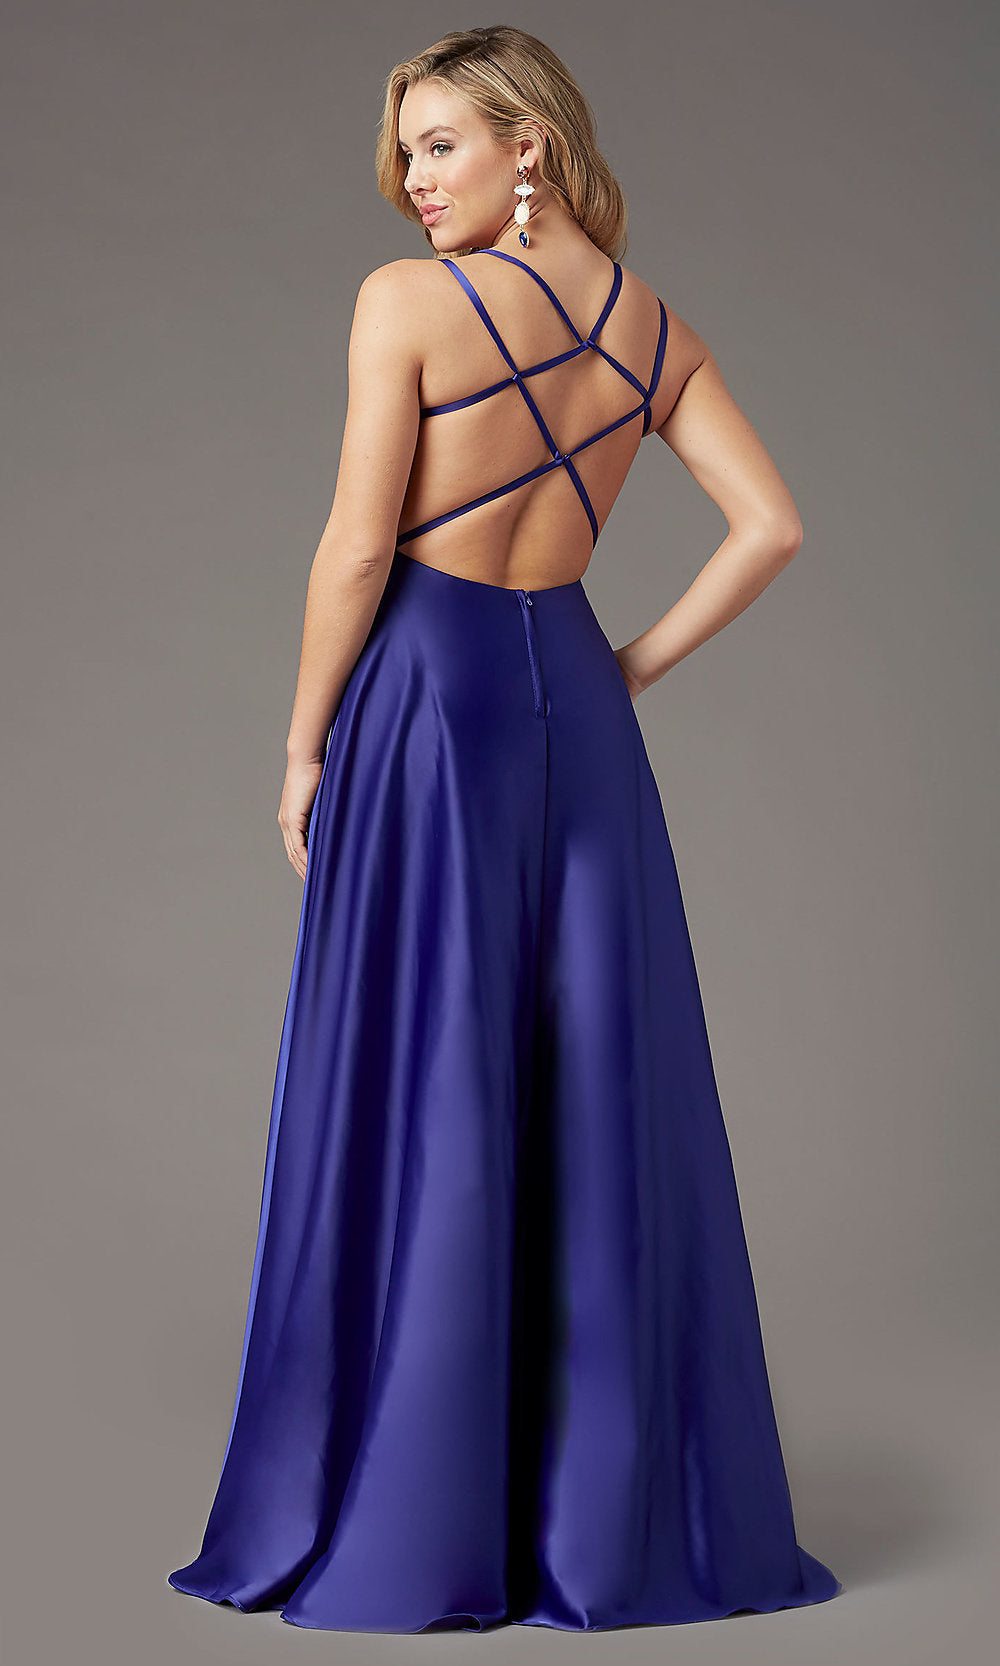 Strappy-Open-Back Satin Long Prom Dress by PromGirl